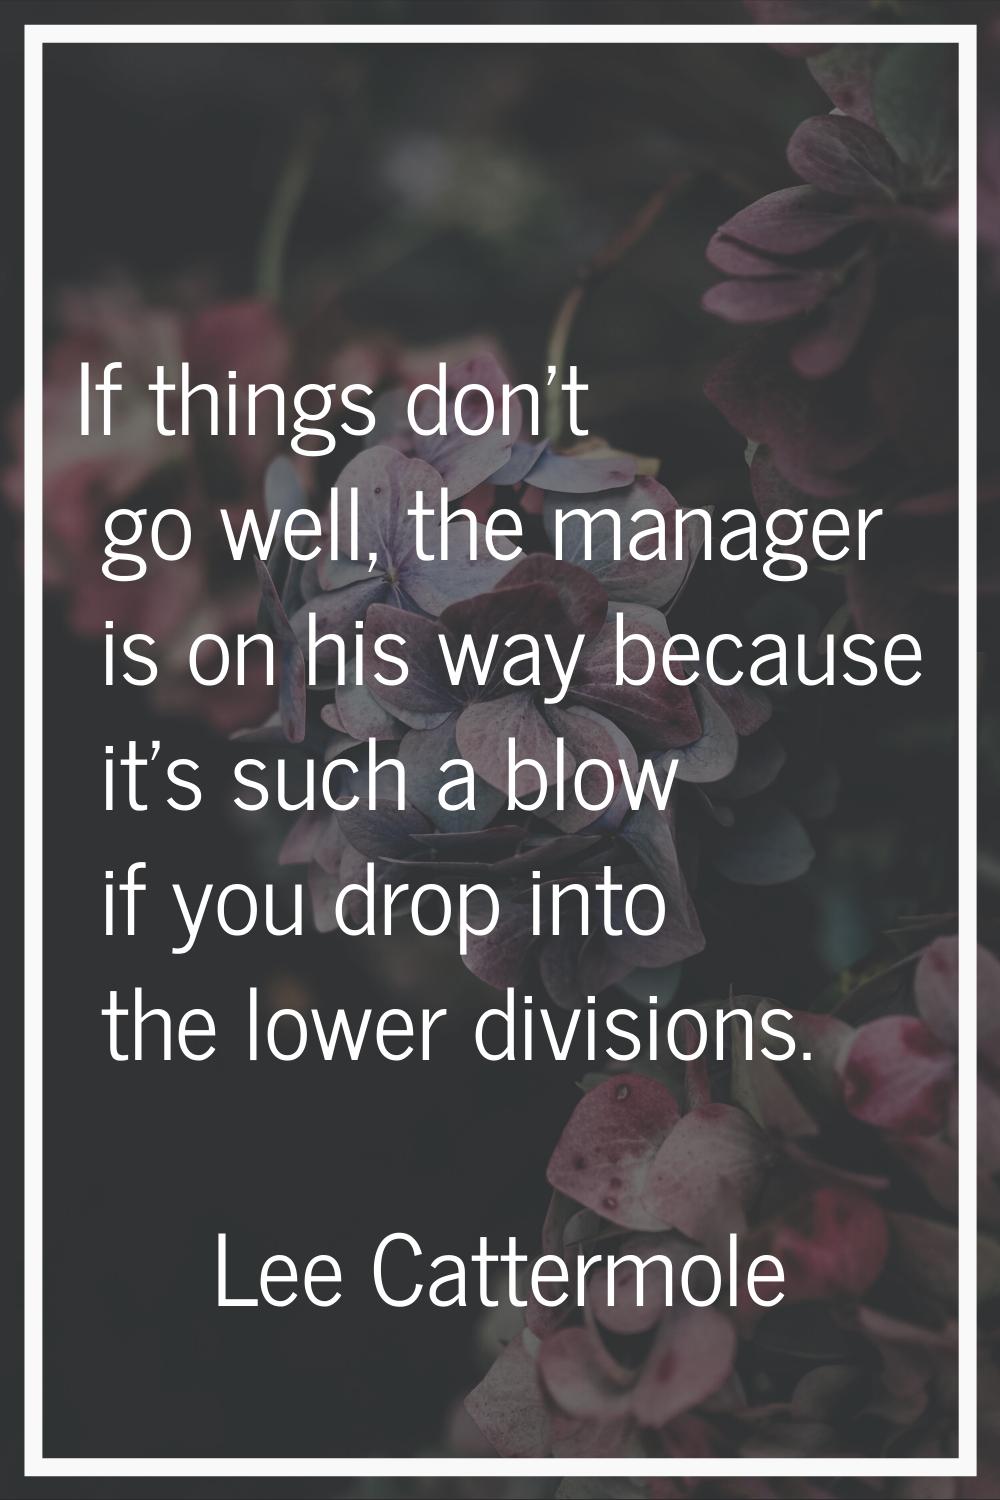 If things don't go well, the manager is on his way because it's such a blow if you drop into the lo